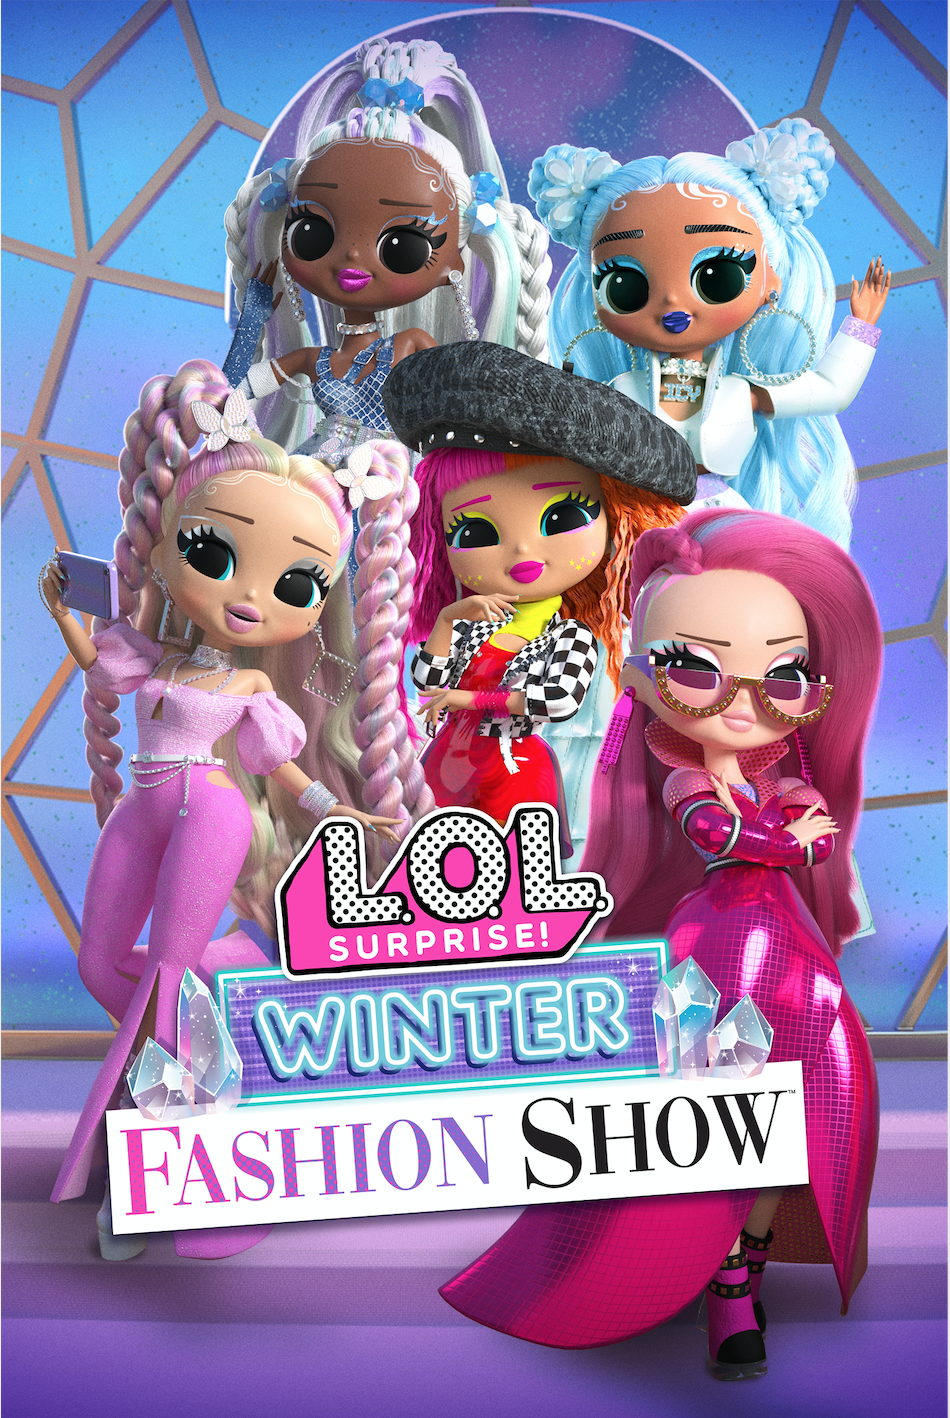 Bring the Runway to the Living Room with the L.O.L. Surprise!™ All-New Fashion Show Movie Release and Robust Toy Line In Time for the Holidays